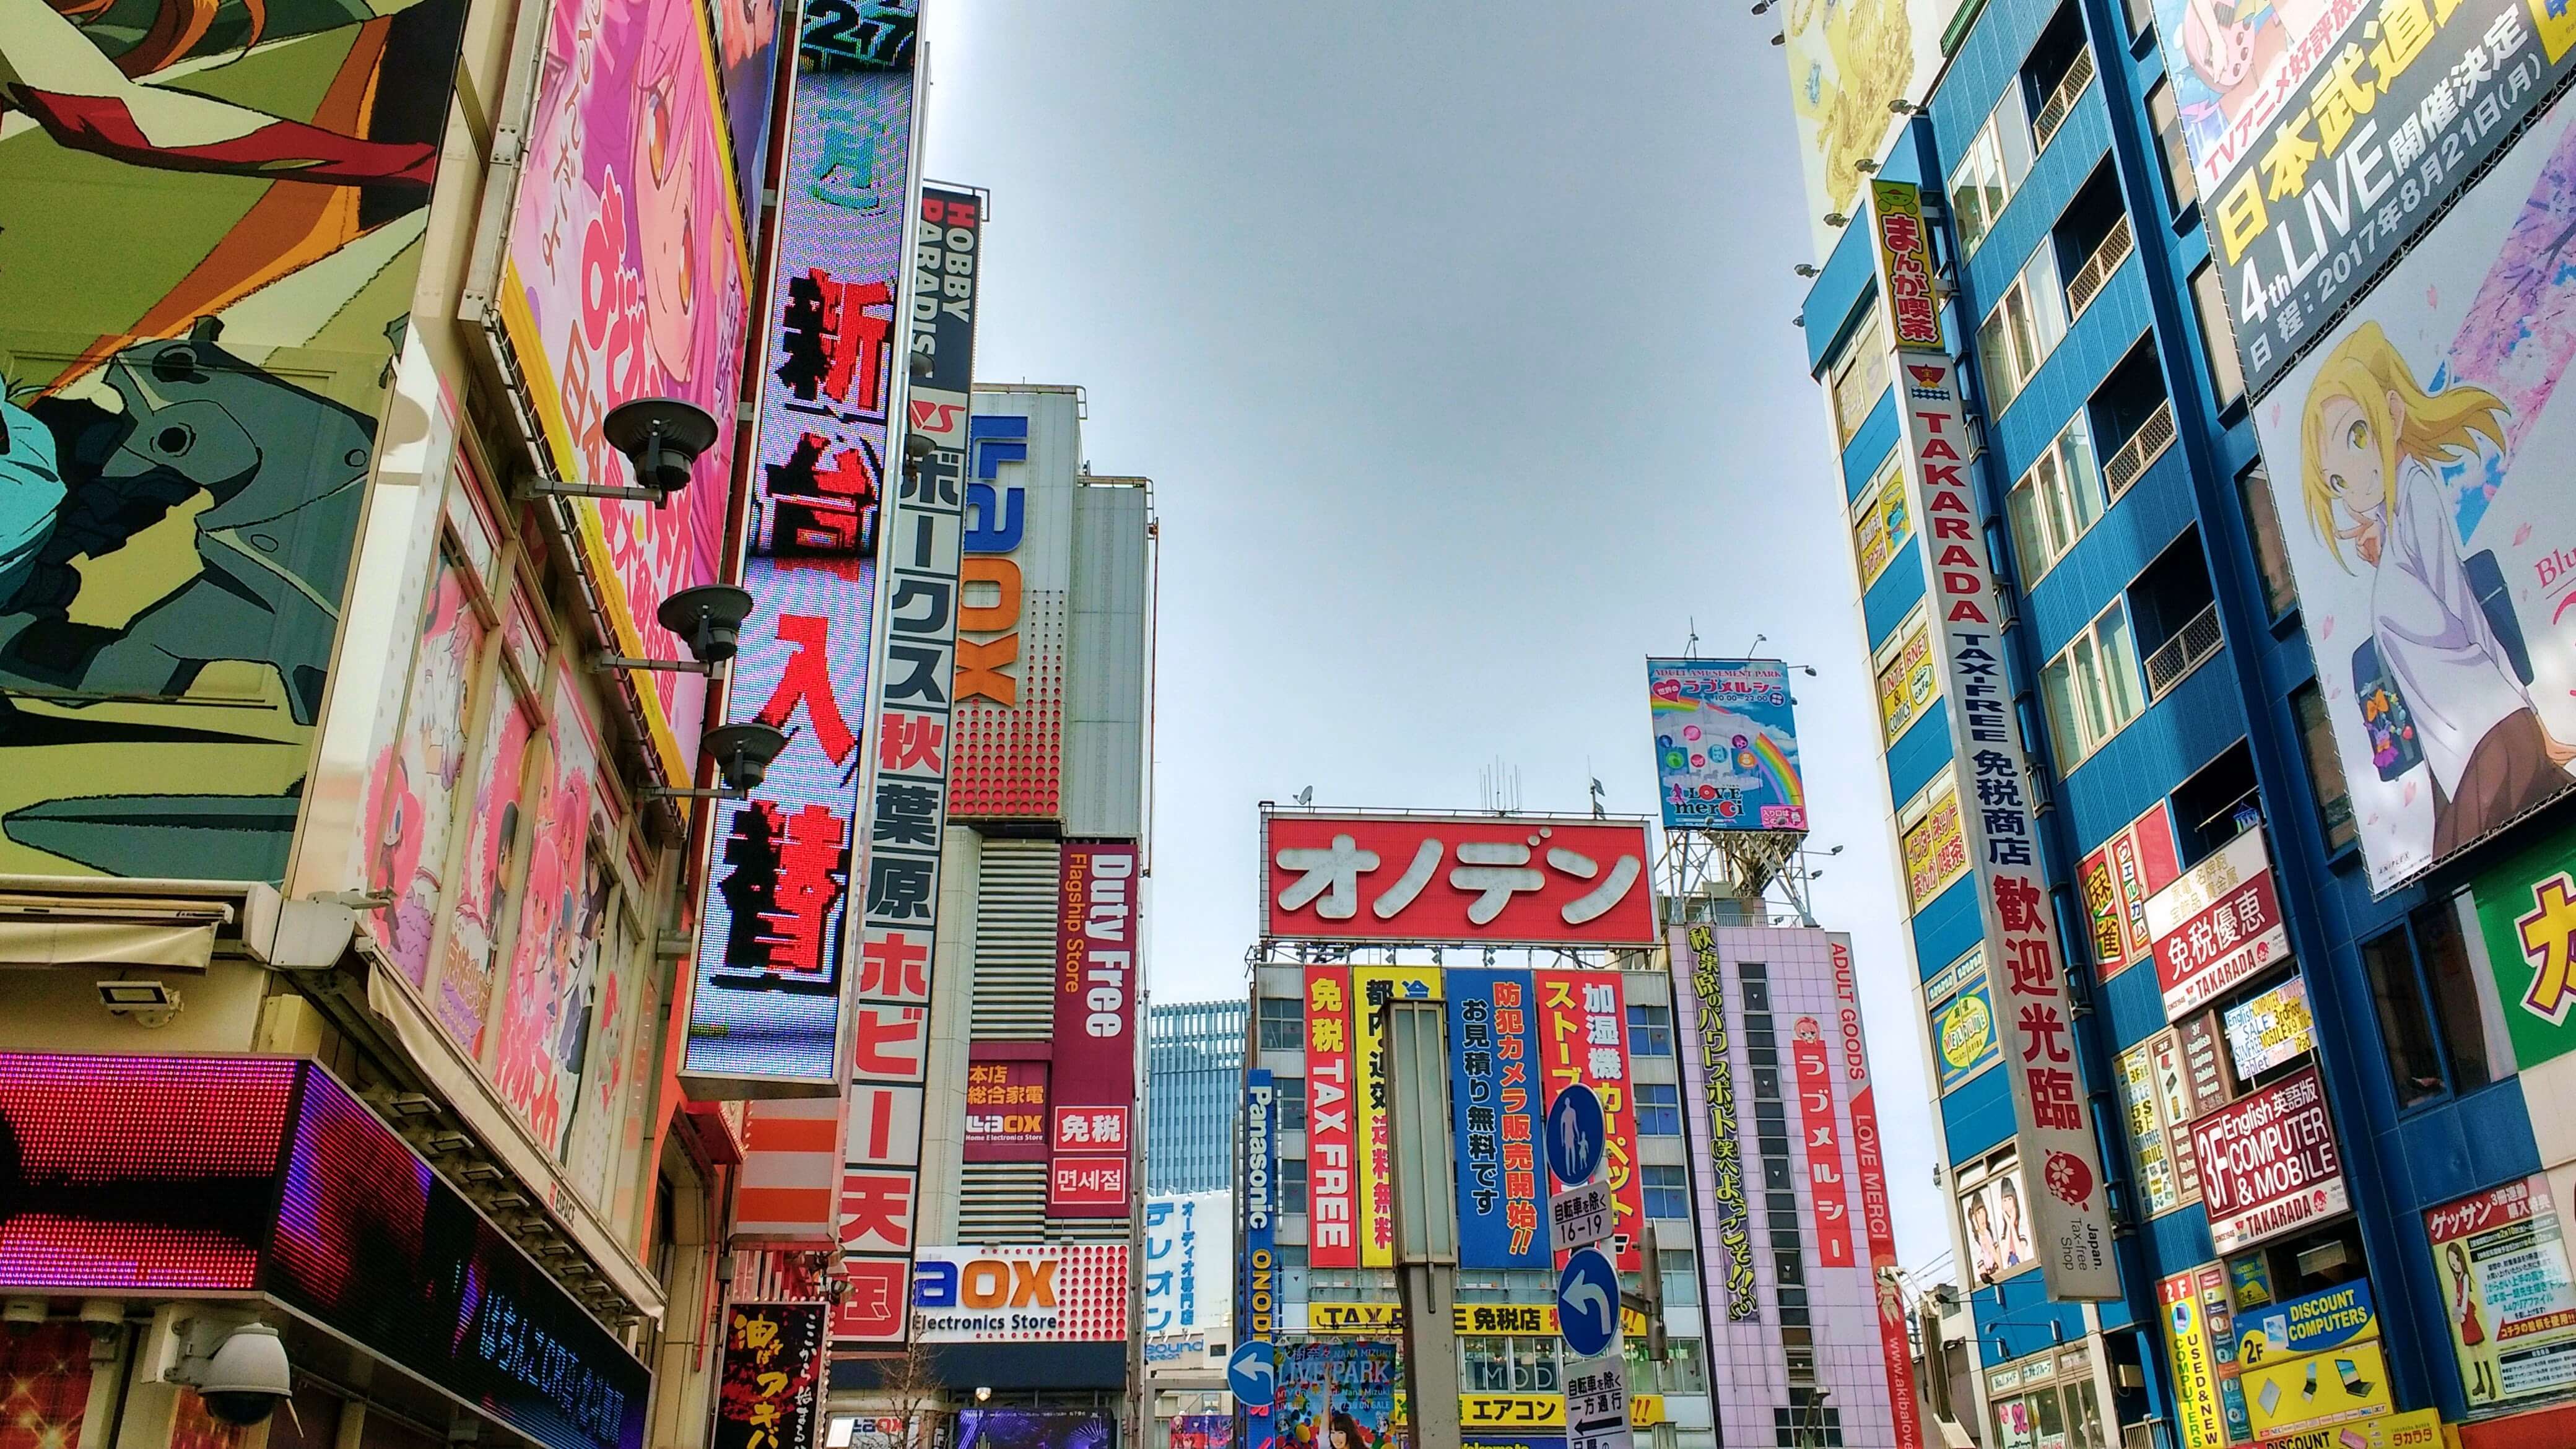 Rows of buildings on a city street covered in colourful signs